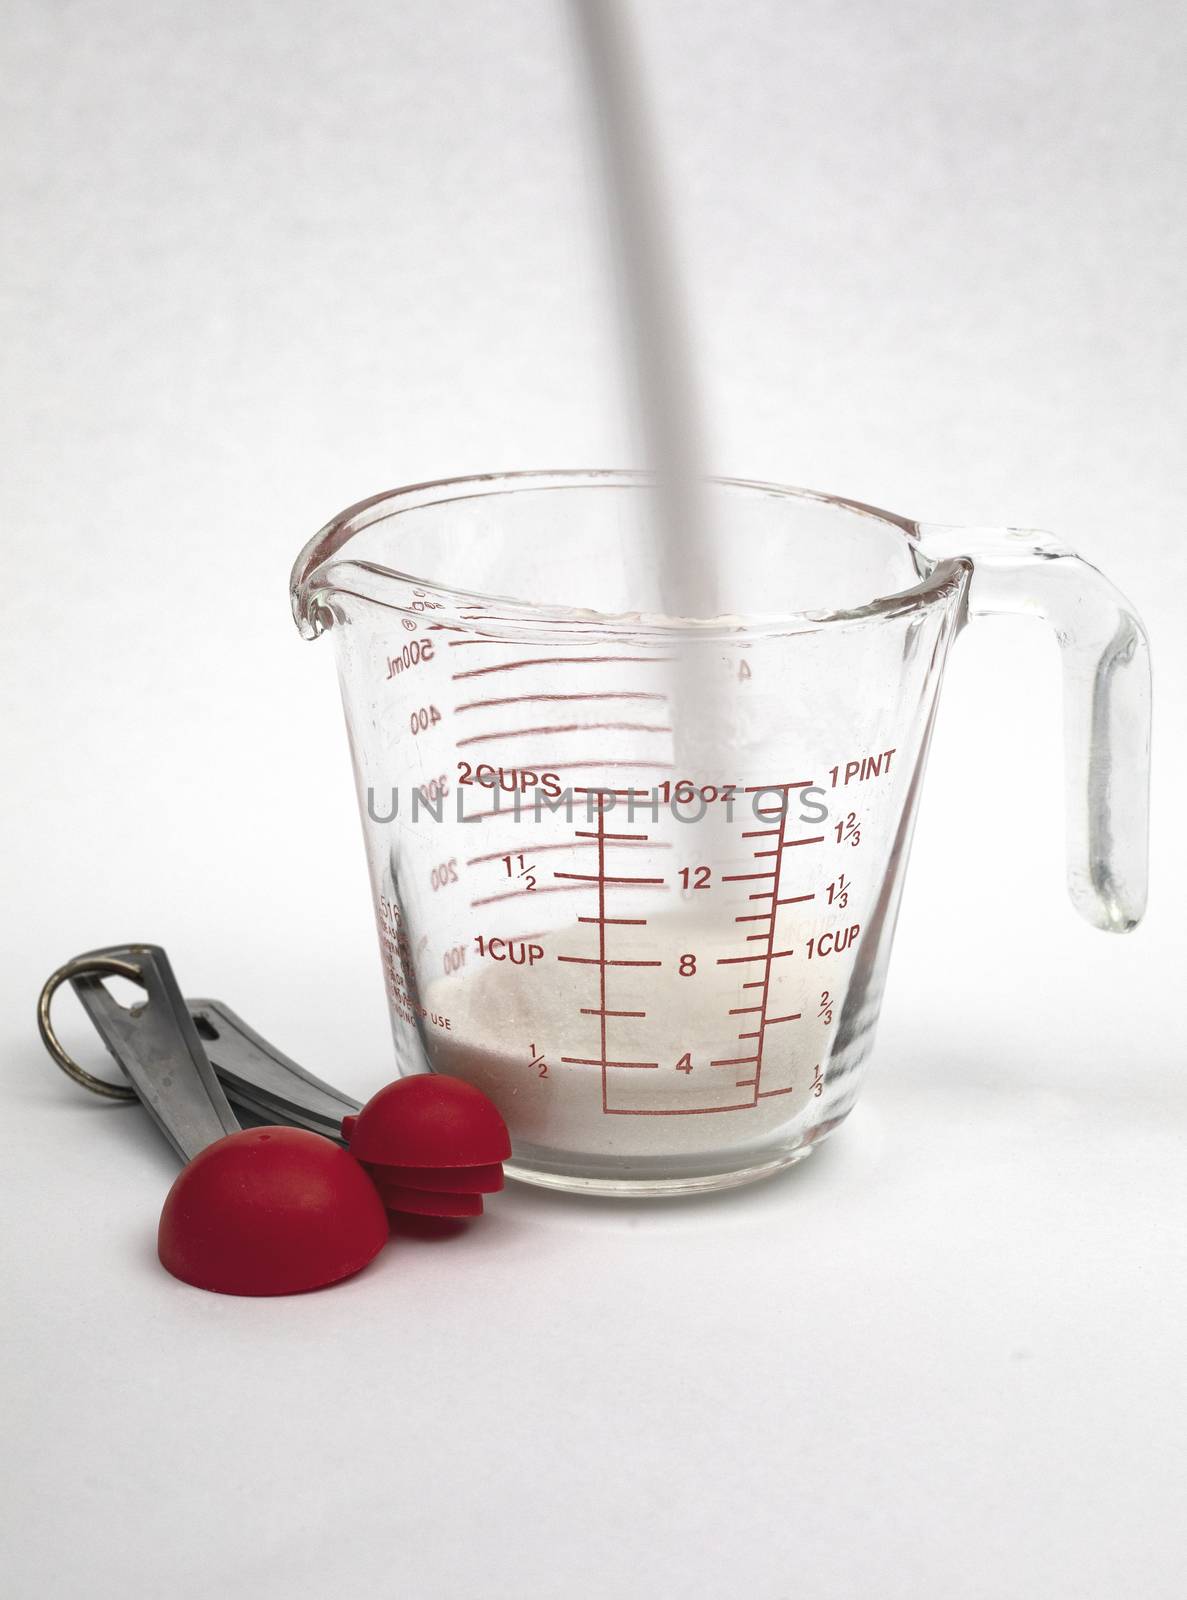 Pouring white cane sugar into a measuring cup with measuring spoons in view, time exposure.